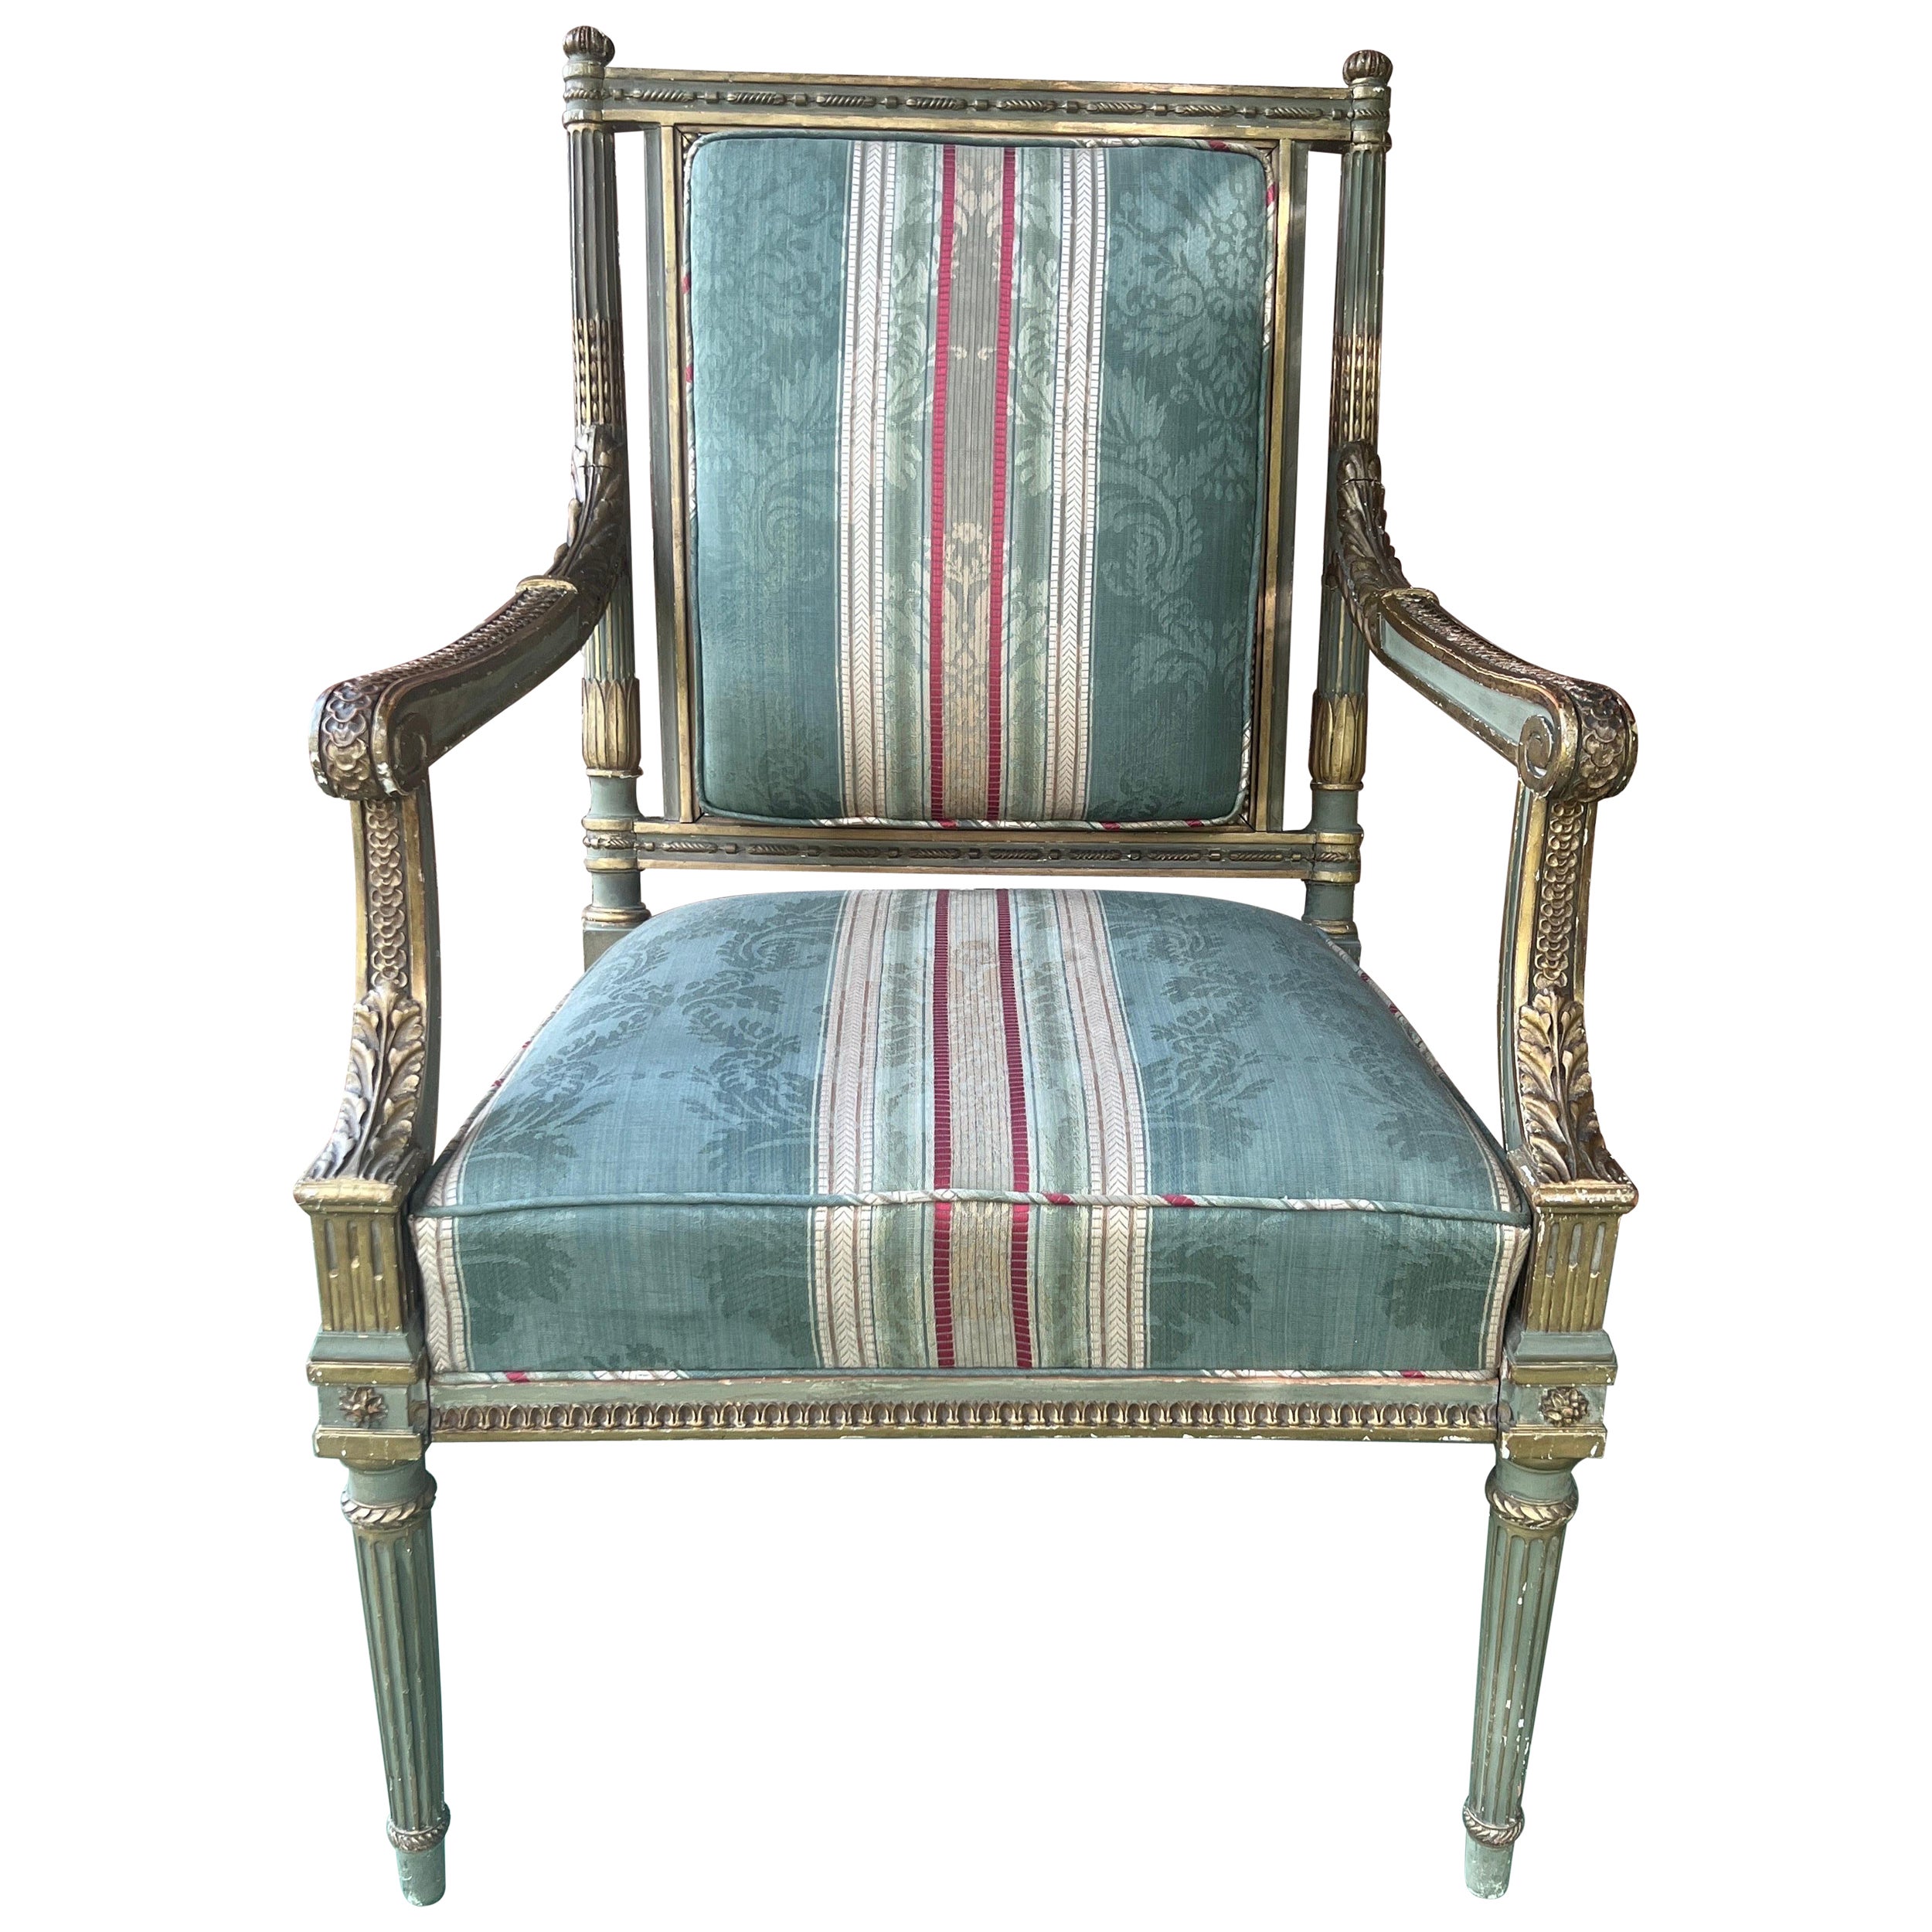 Attr: Georges Jacob (French, 1739-1814), Carved Gilt wood & Polychrome Armchair